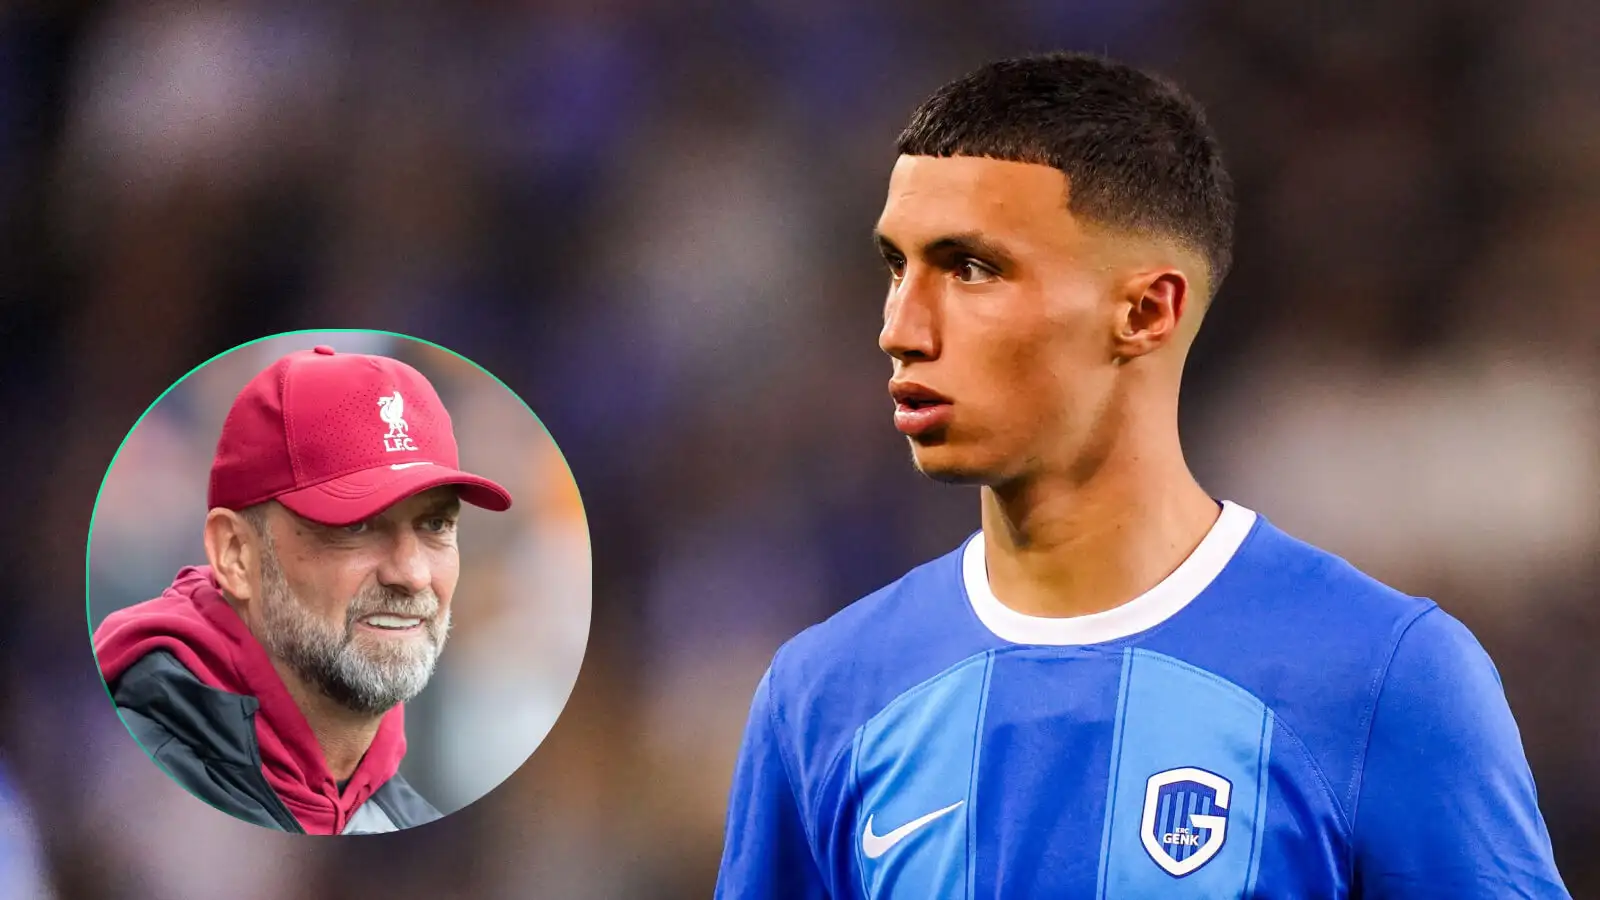 Liverpool tipped to beat Tottenham to Morocco playmaker as Klopp learns bargain fee for 'prized silverware'